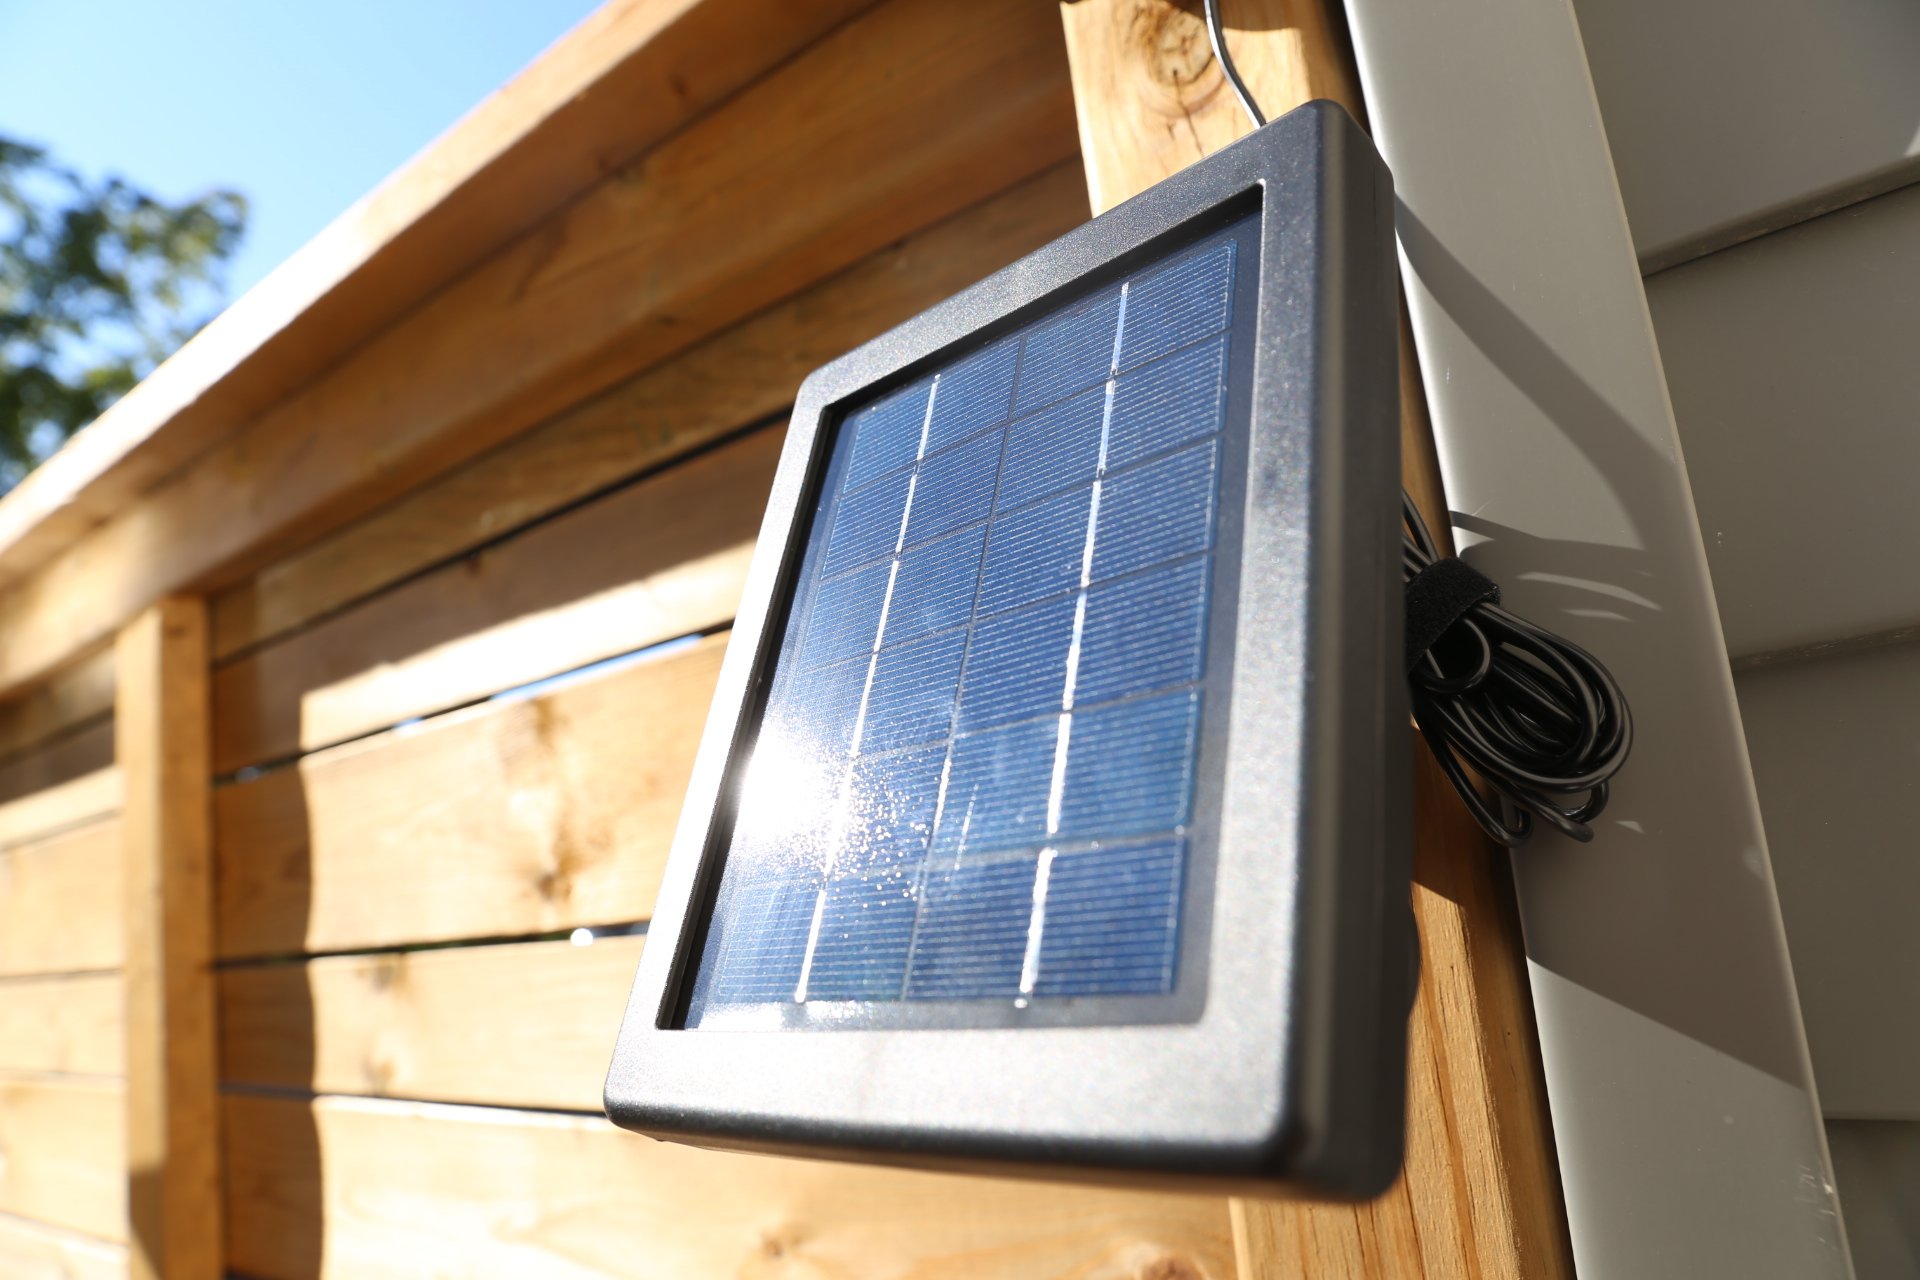 Ring Stick Up Cam and Solar Panel combo provides peace of ...